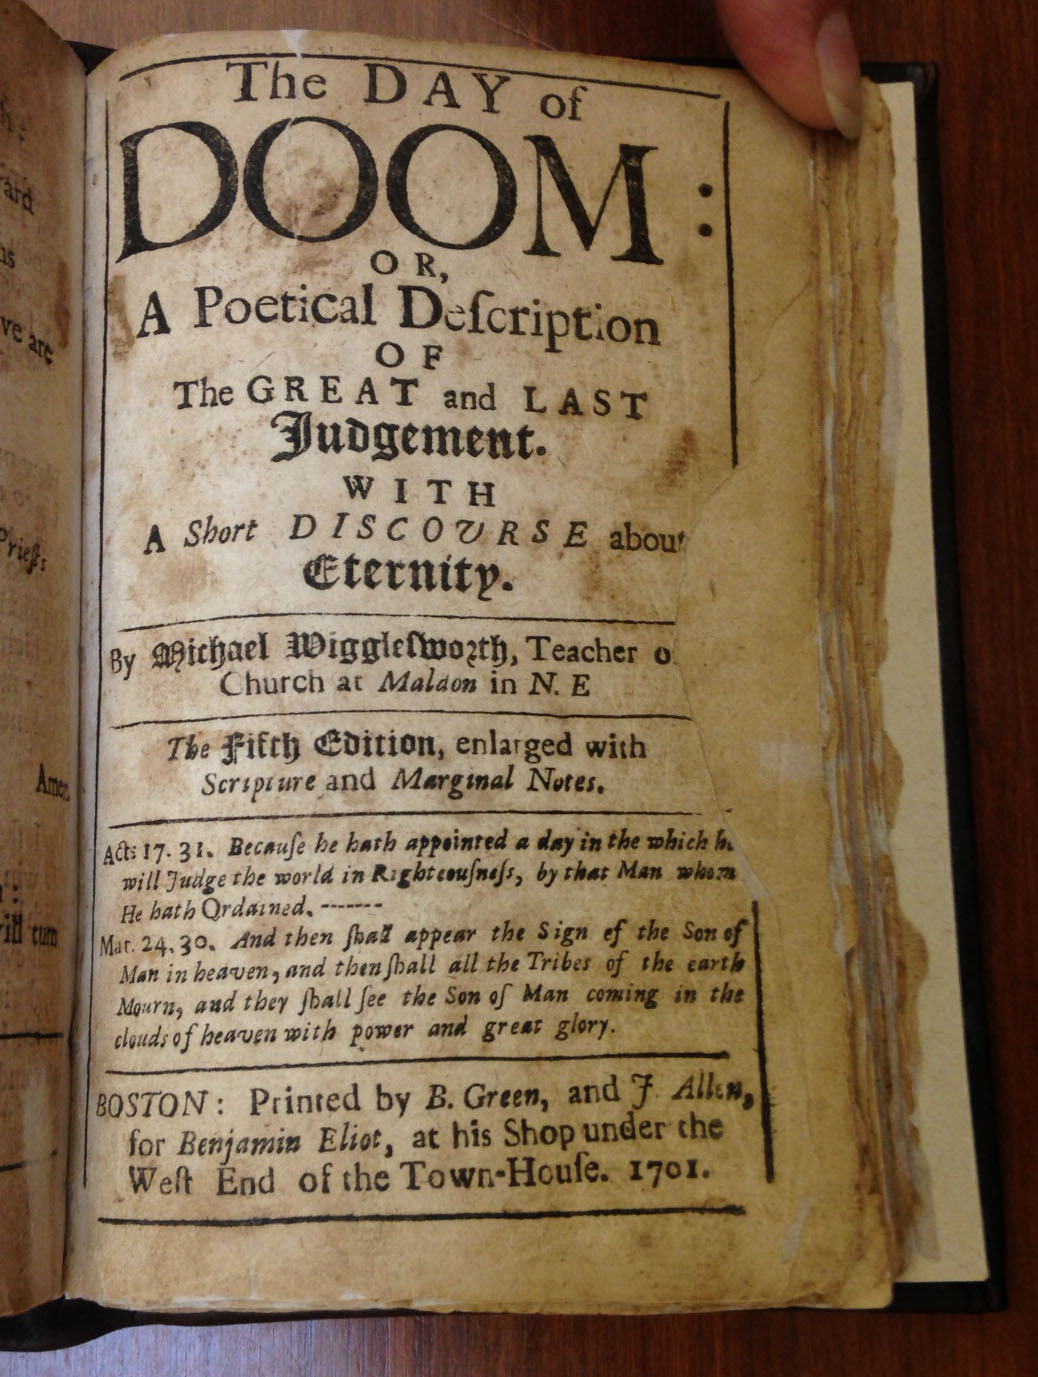 The title page to Michael Wigglesworth's The Day of Doom (Boston, 1701). It is bound, as issued, following the second edition of Wigglesworth's other verse collection, Meat Out of the Eater (Boston, 1689).